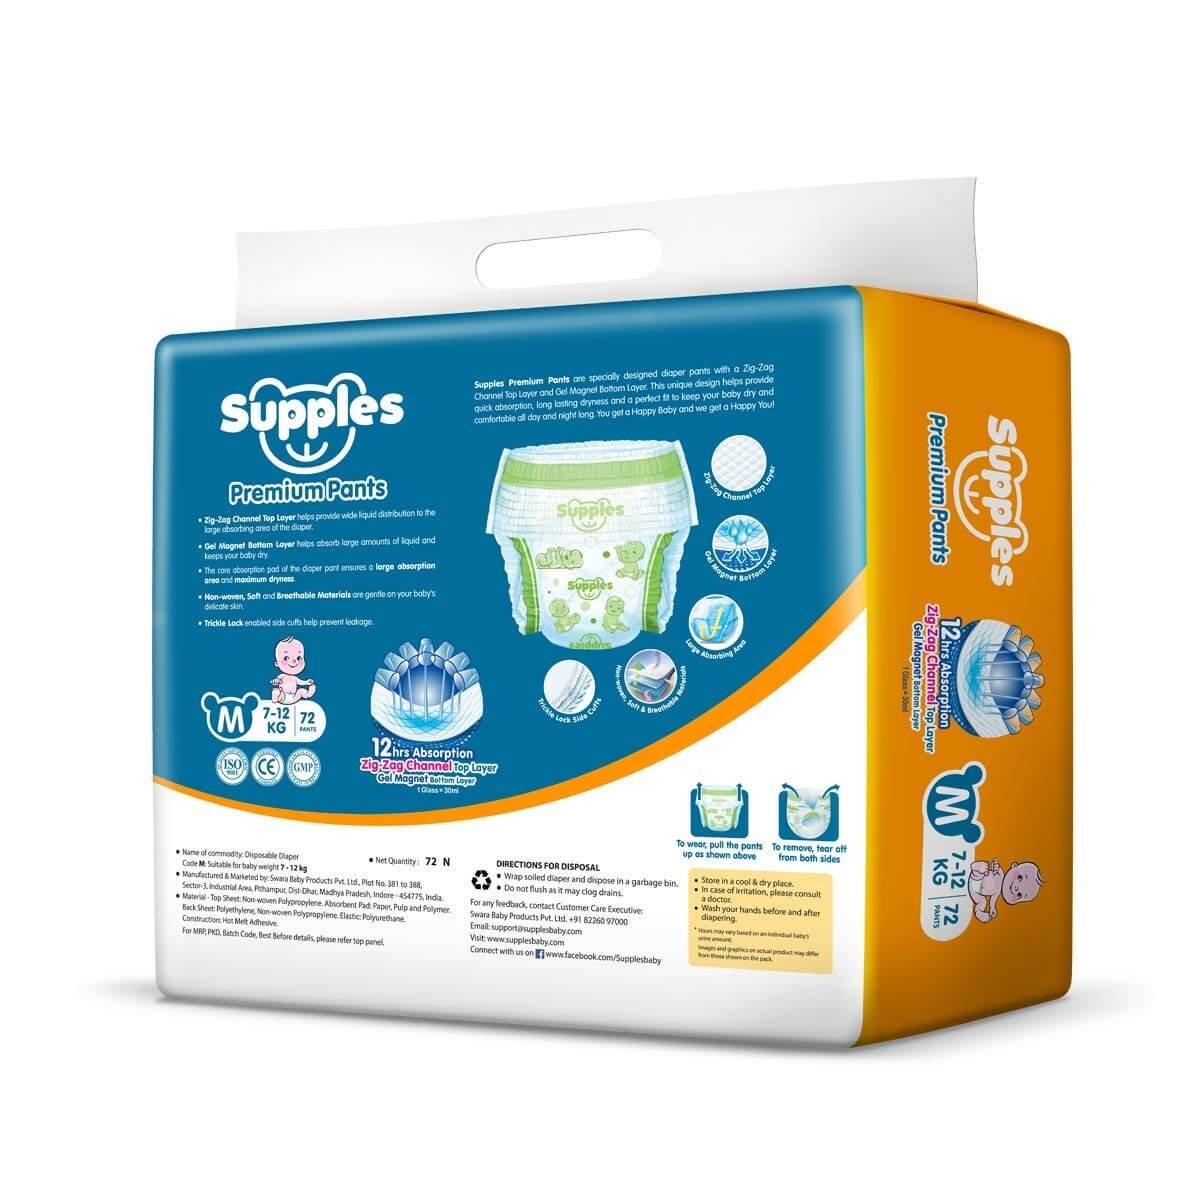 https://shoppingyatra.com/product_images/Supples Baby Pants Diapers, Medium (7-12 kg), 72 Count2.jpg